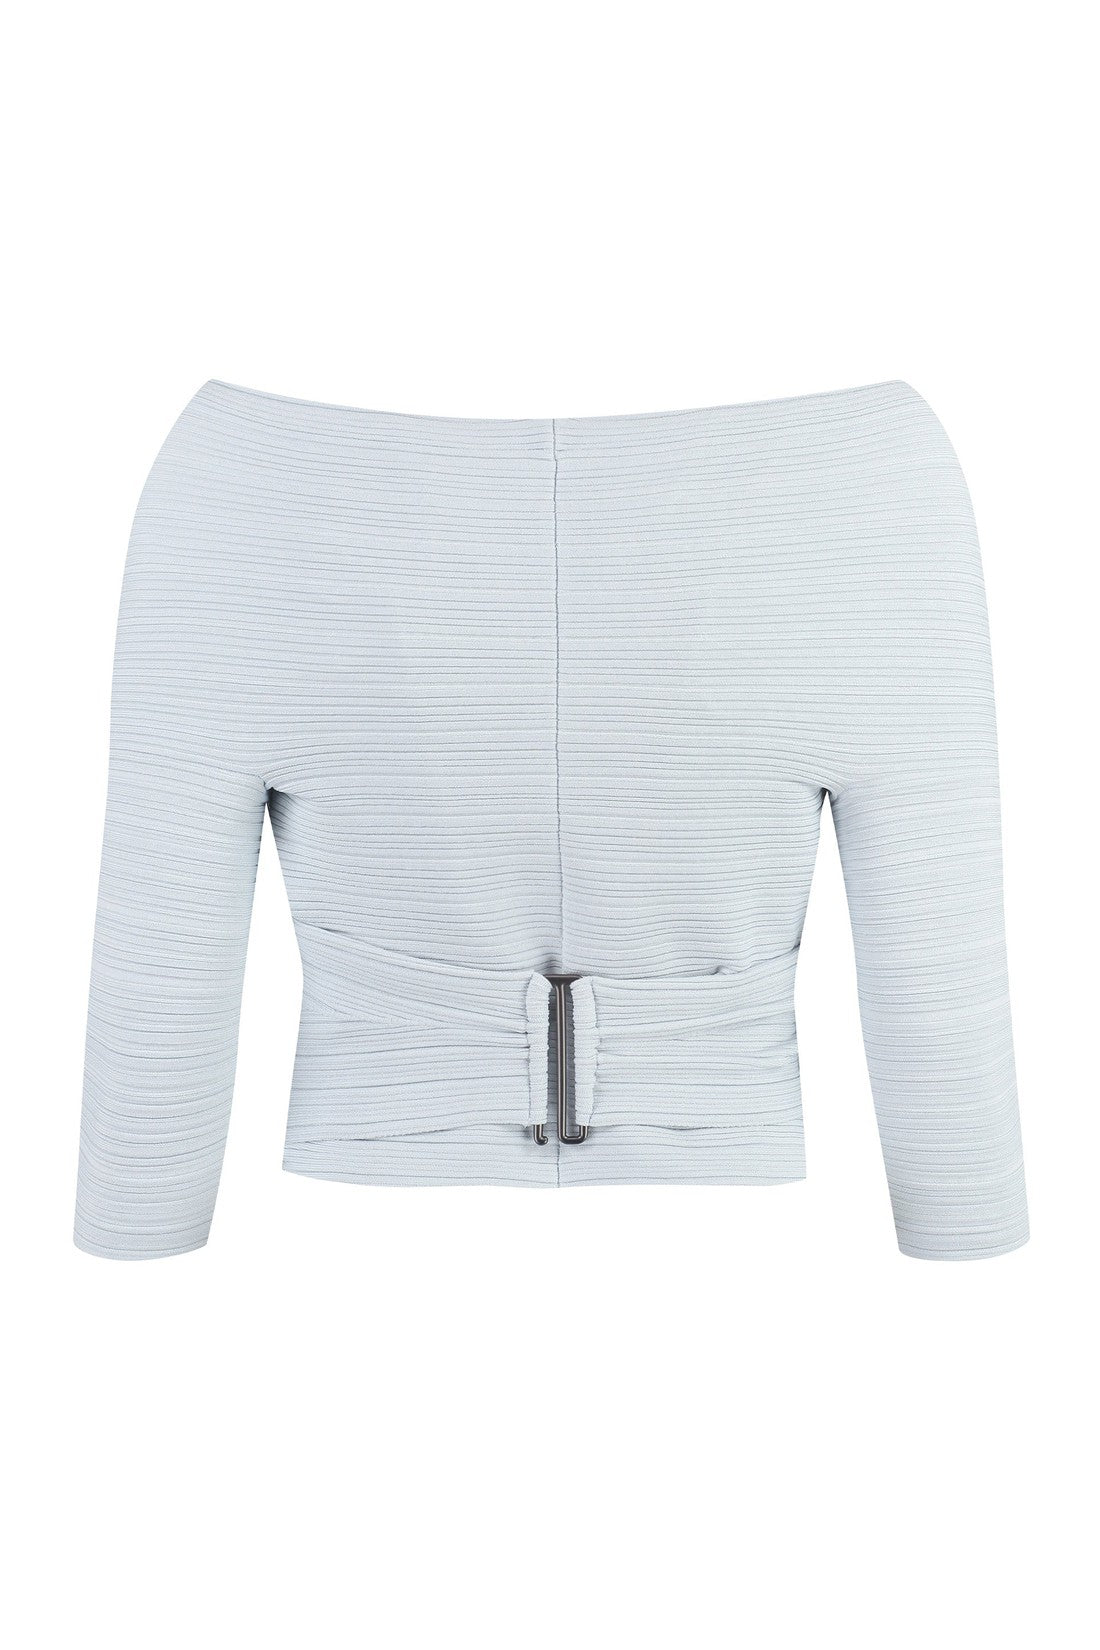 Philosophy di Lorenzo Serafini-OUTLET-SALE-Ribbed knit crop top-ARCHIVIST